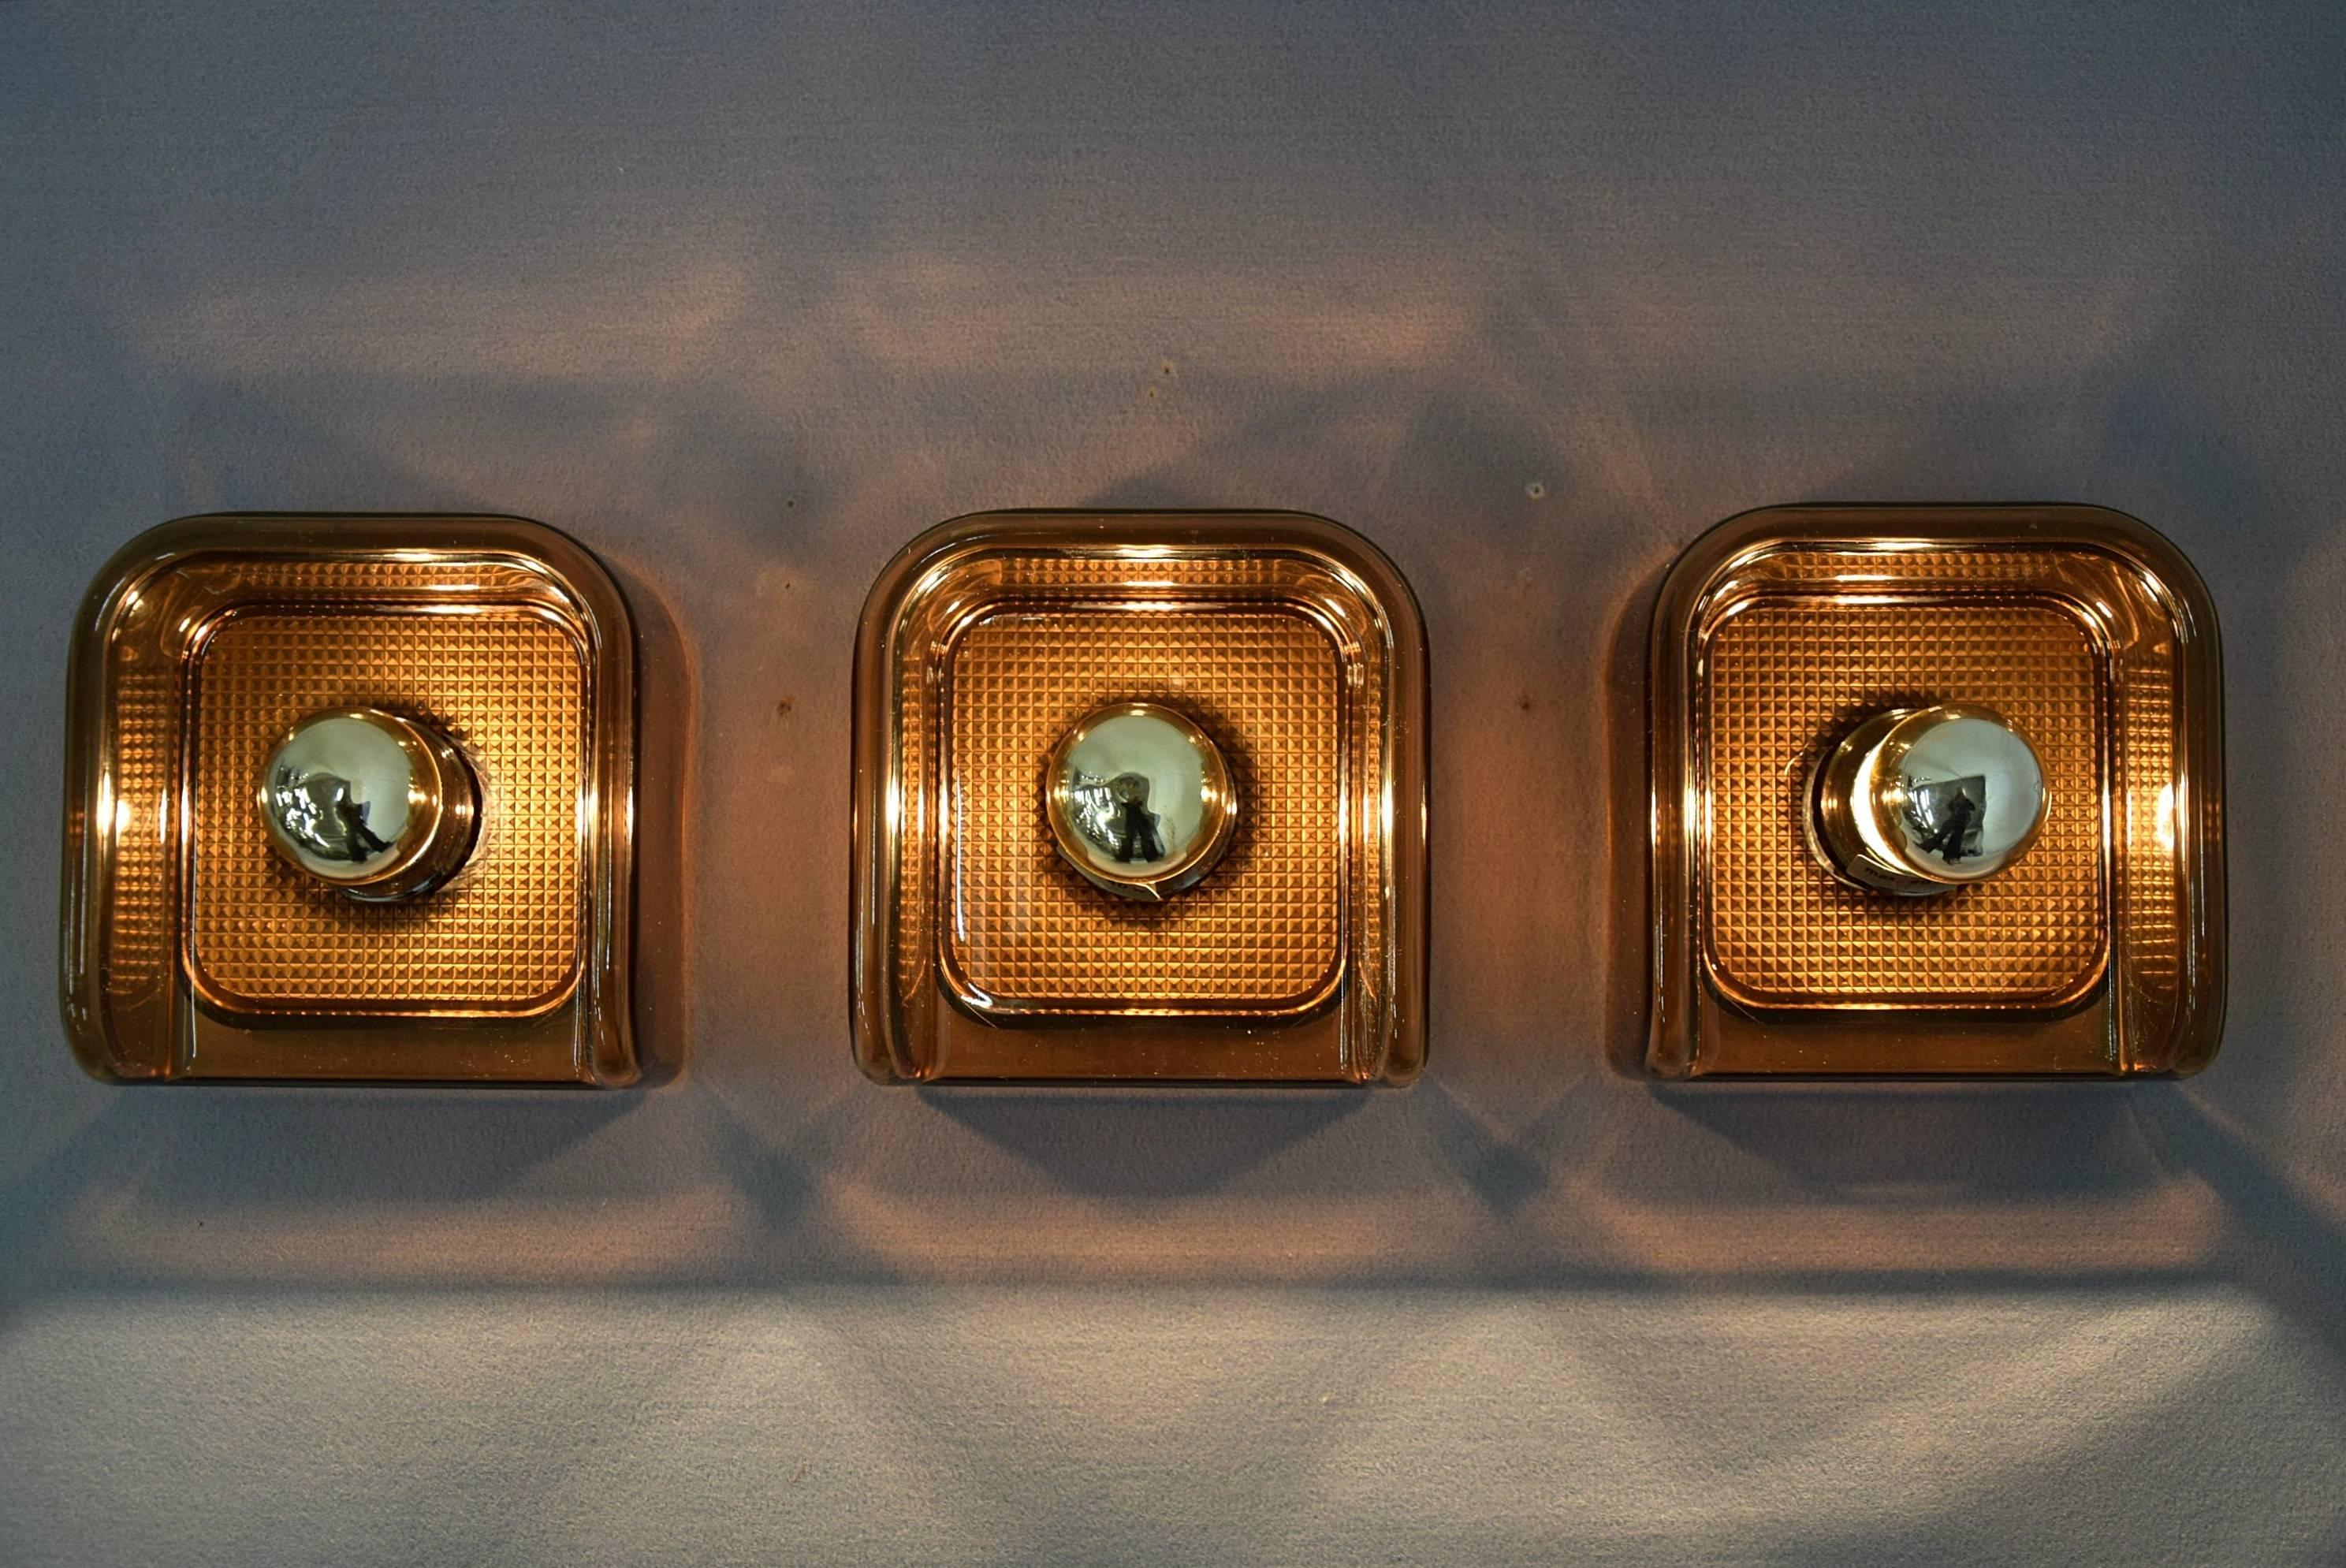 Brown sconces Mid-Century Modern Guzzini
Three new old stock Mid-Century Modern Guzzini wall lights.
Beautiful brown plexiglass. 30 pieces available new in box.

Measurements: H 15 x W 15 x D 9 cm.

Price is for 3 pcs.